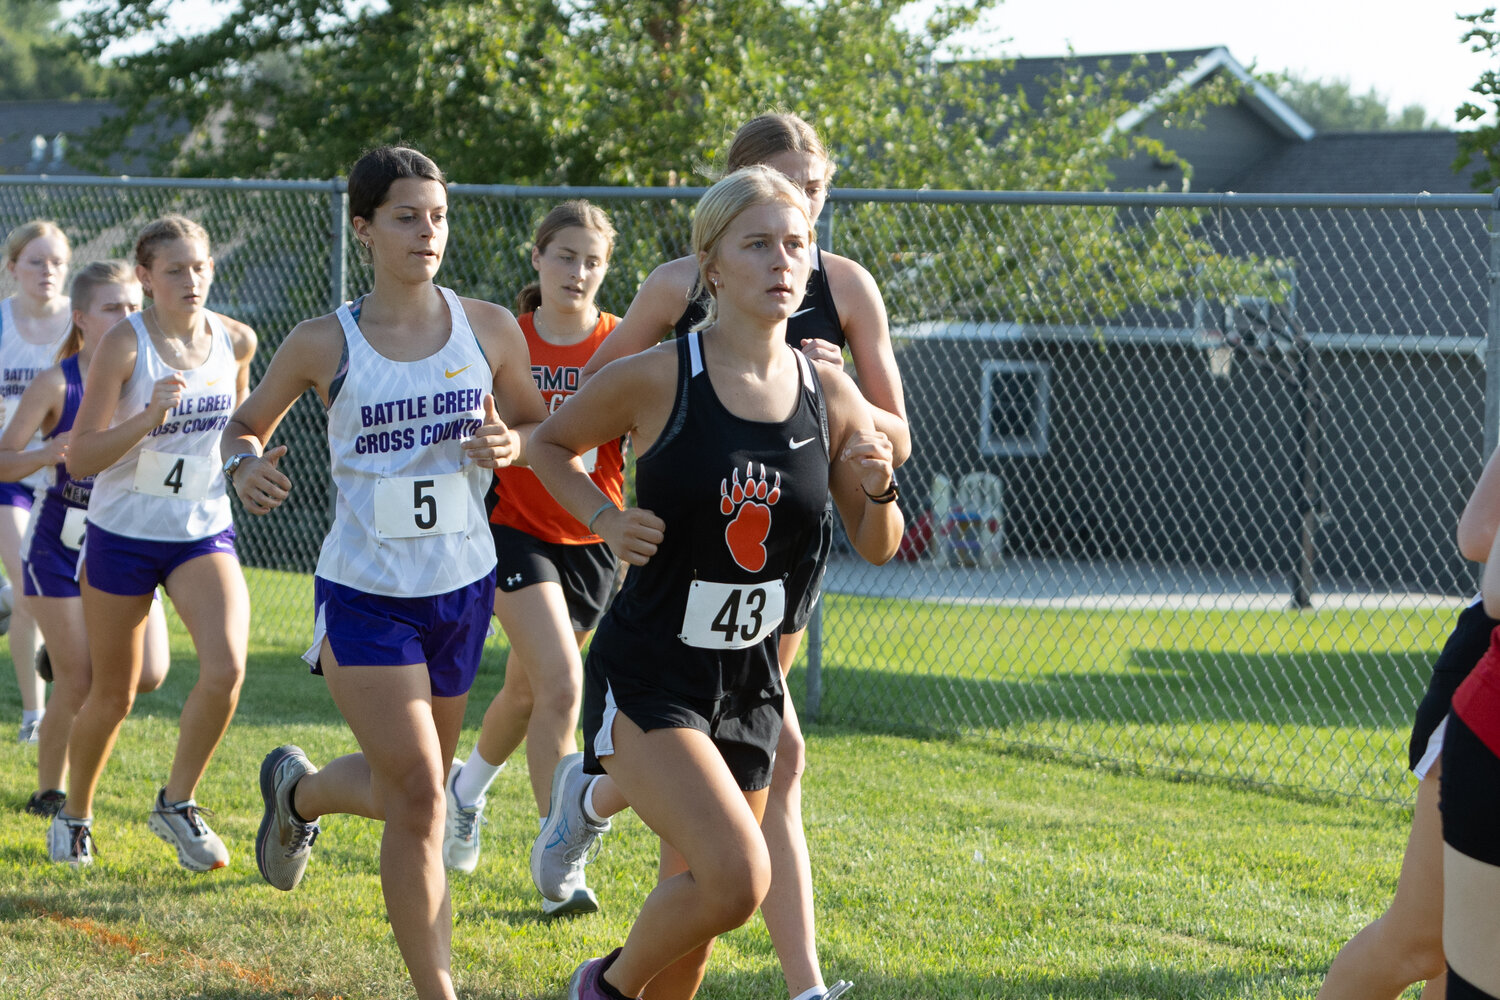 Kate Tasler runs for the LCC girls during the Hartington-Newcastle Invitational. She finished 23rd as the LCC girls placed fourth.